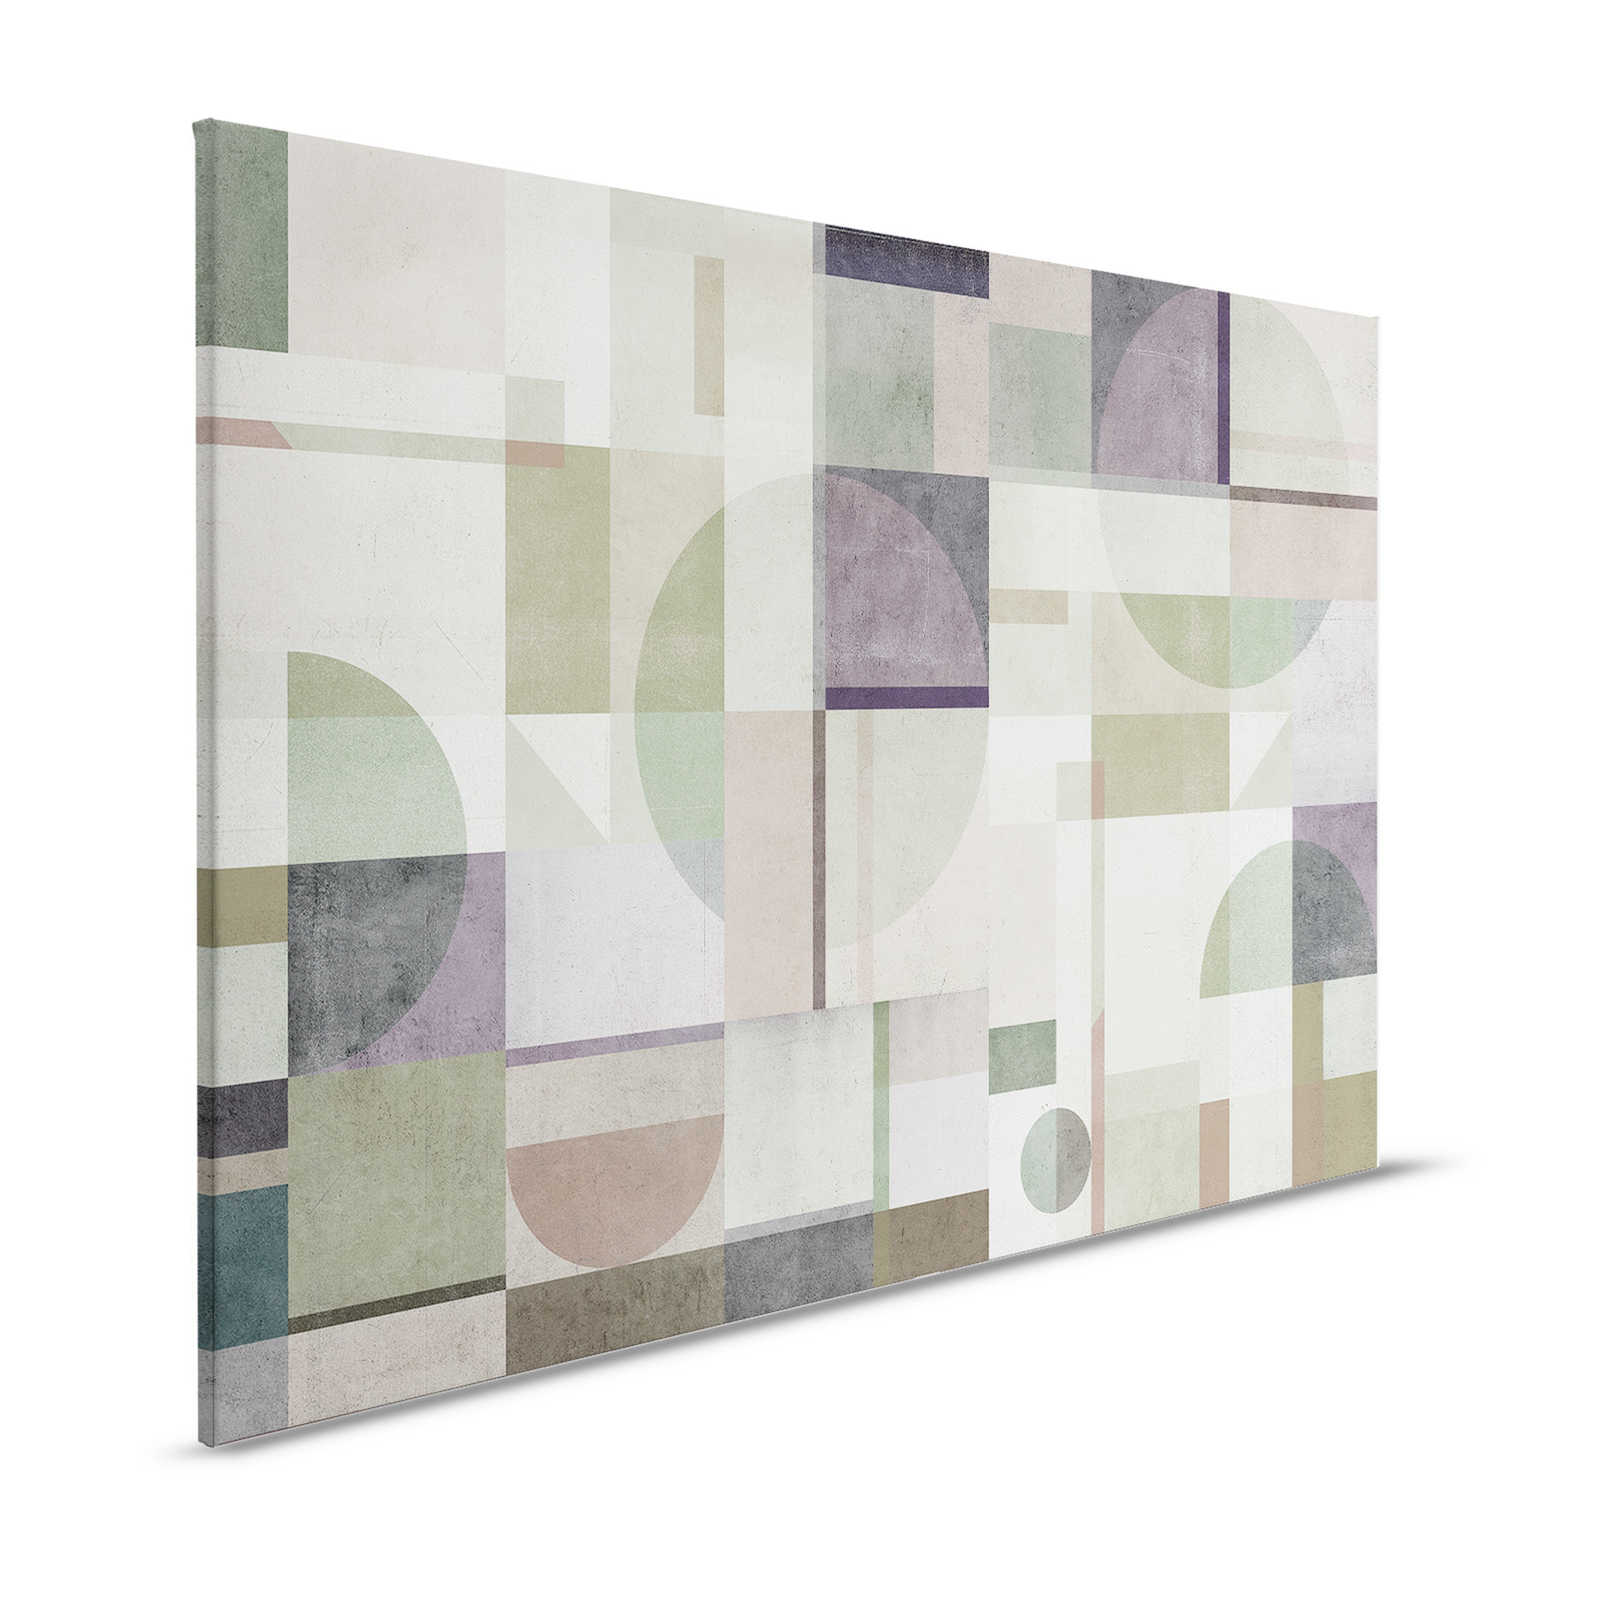 Piazza 1 - Concrete Look Canvas Painting Green & Grey with Graphic Pattern - 1.20 m x 0.80 m
